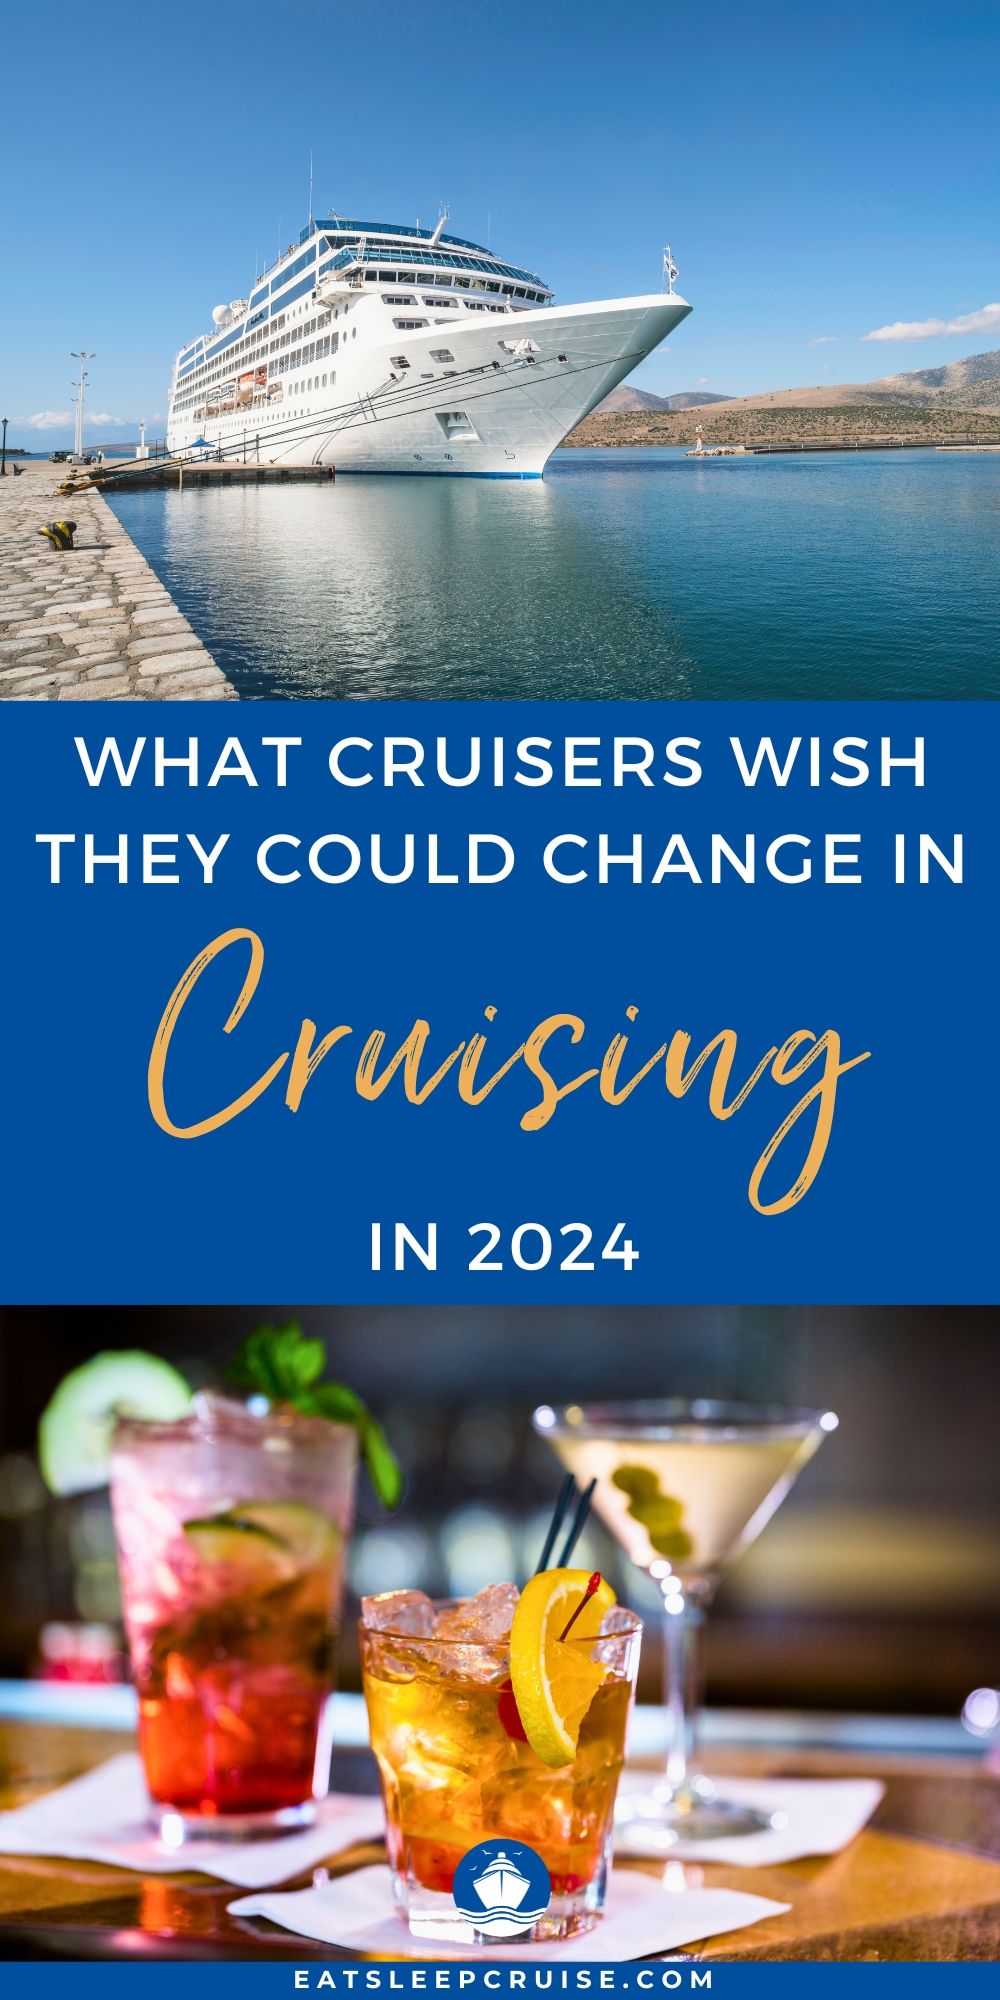 Here's What Should Stop in Cruising in 2024